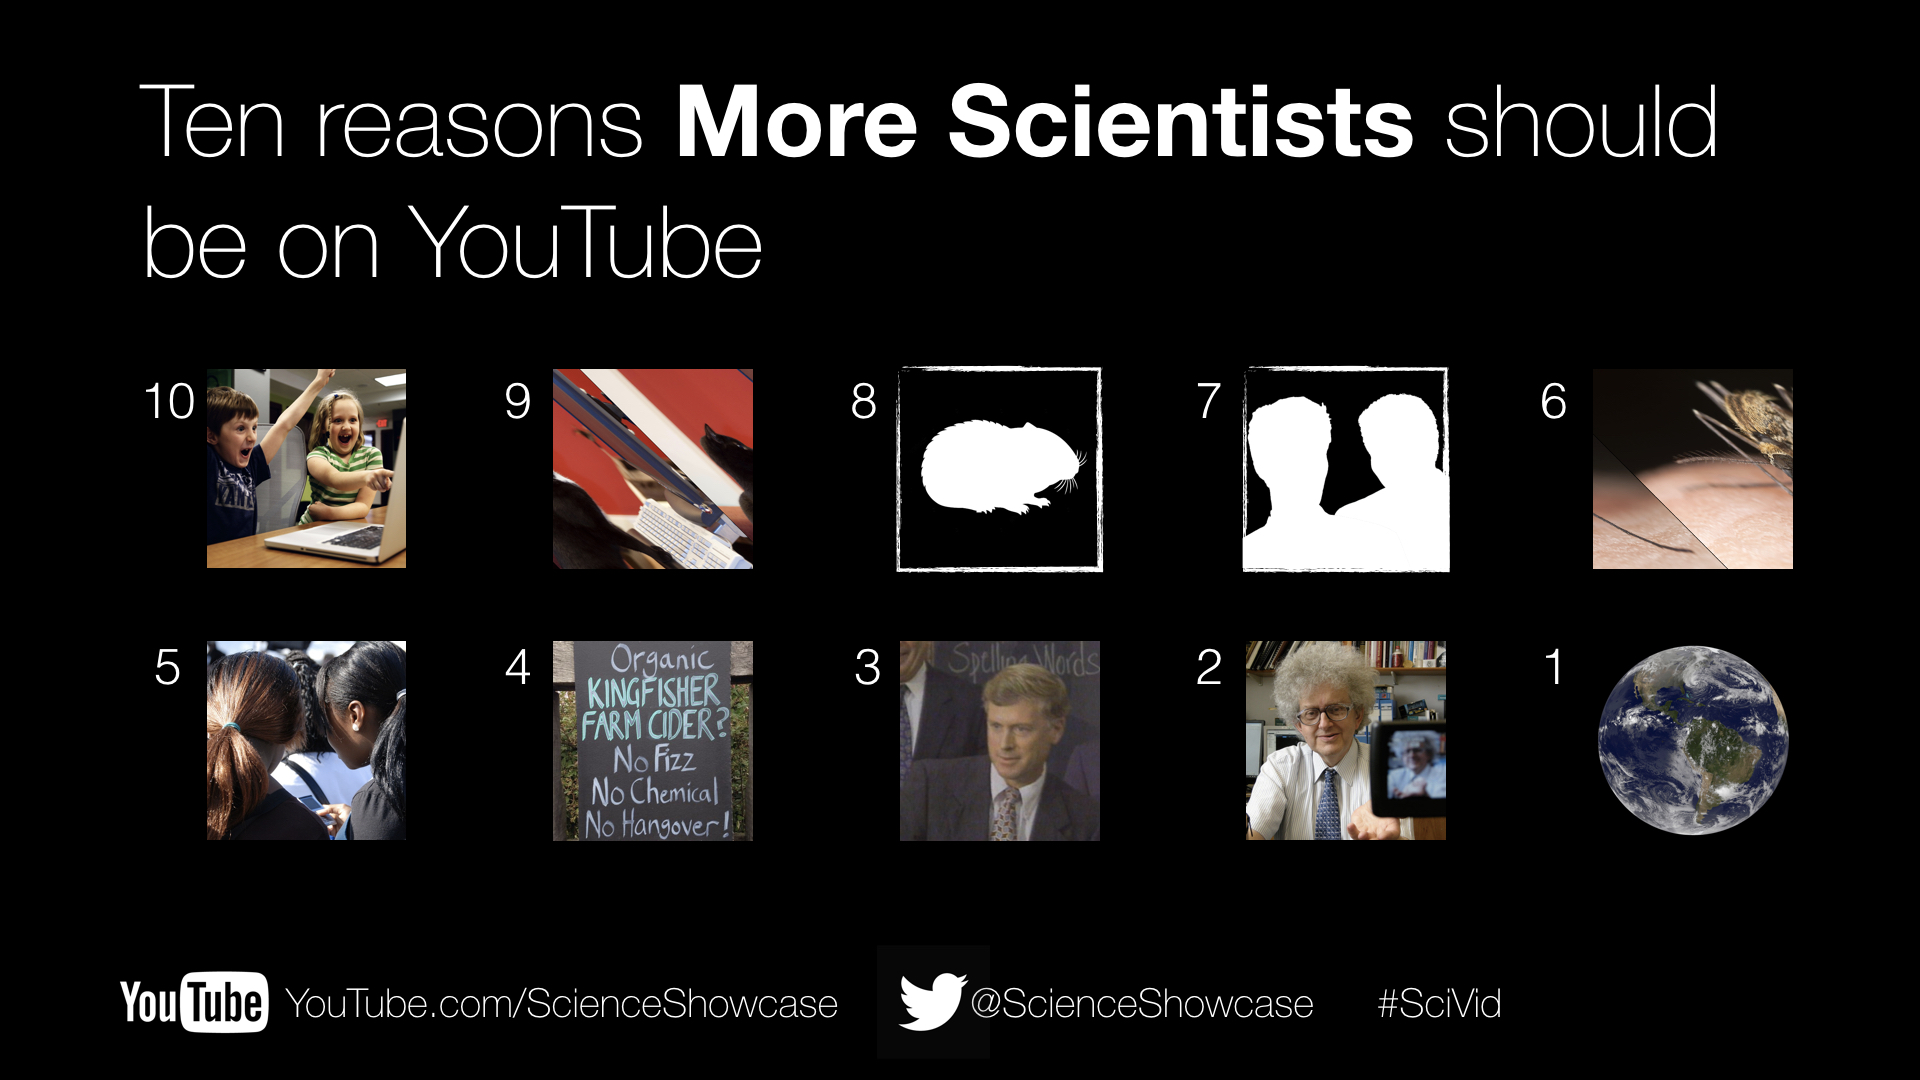 Ten reasons why more scientists should be on YouTube